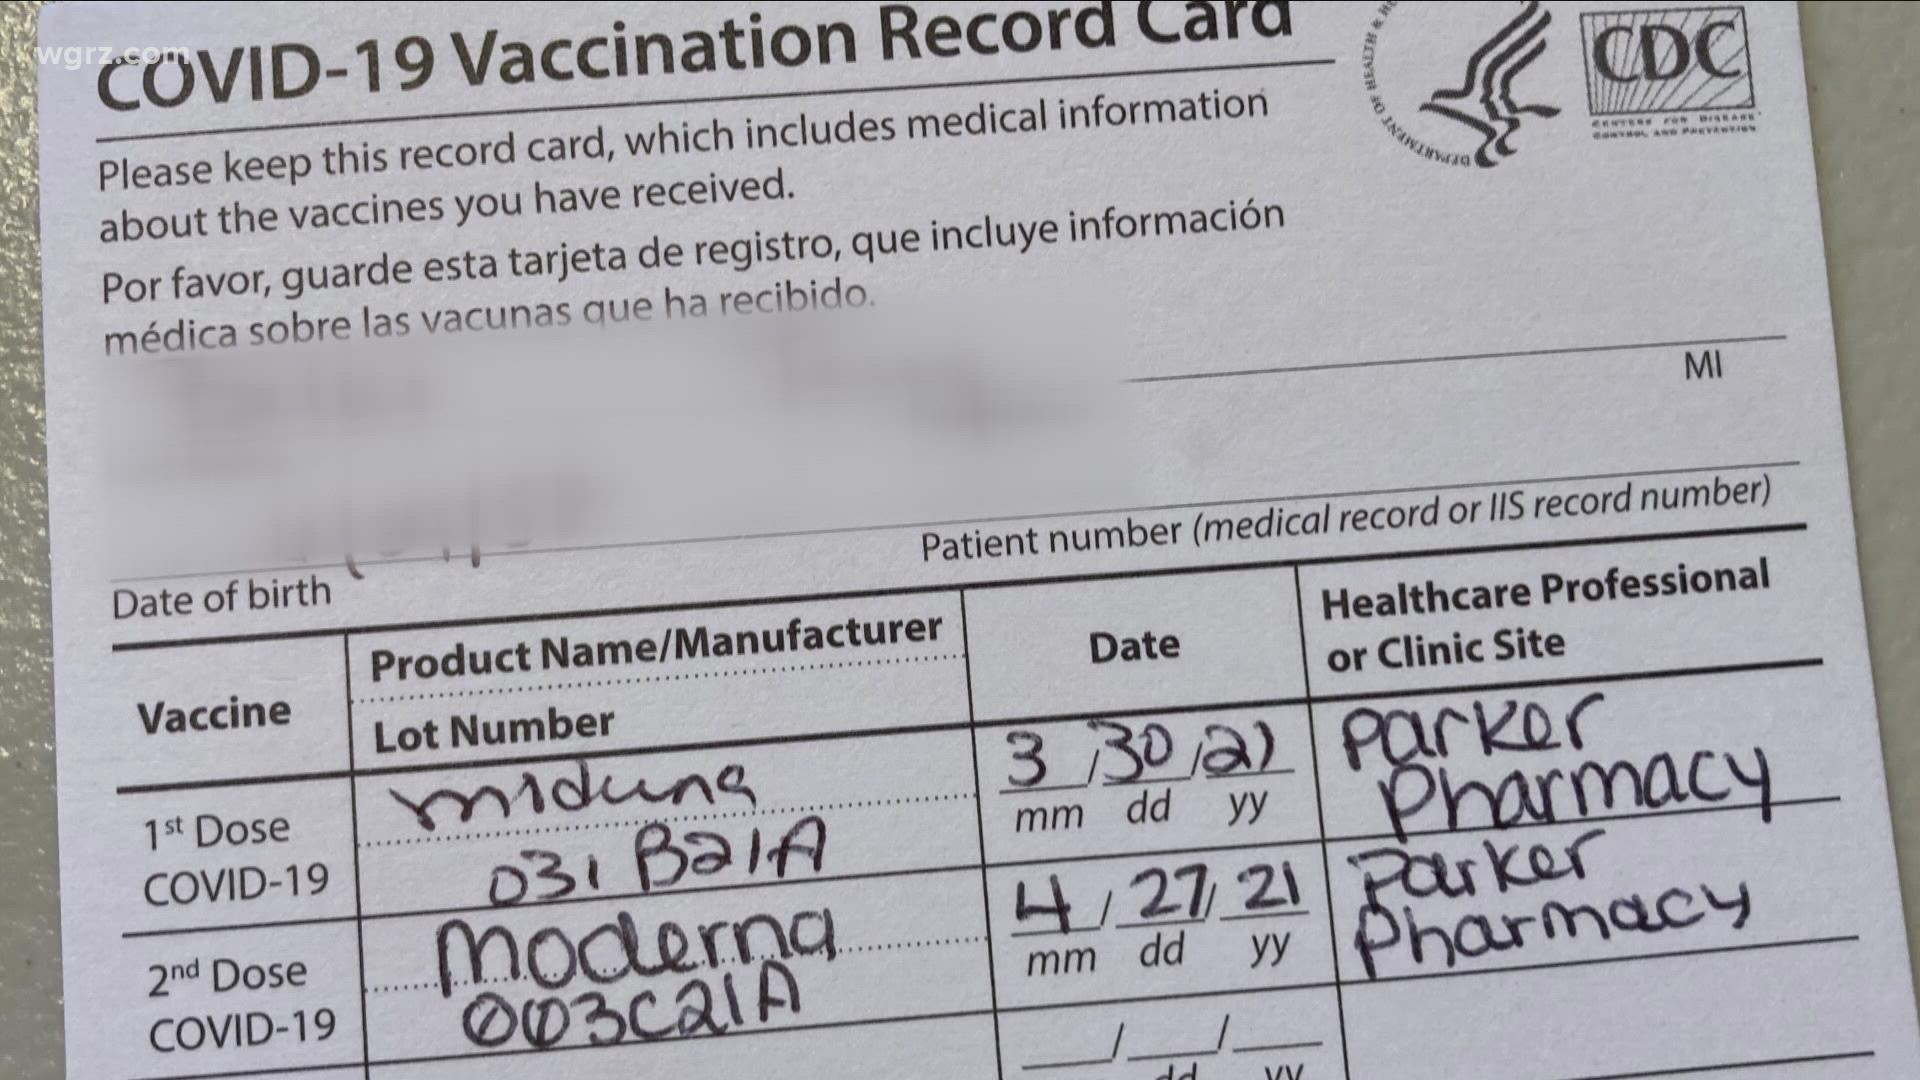 mention forging of vaccine cards - reports it's happening in North Carolina and elsewhere with a federal warning of jail time and a fine if somebody gets caught.